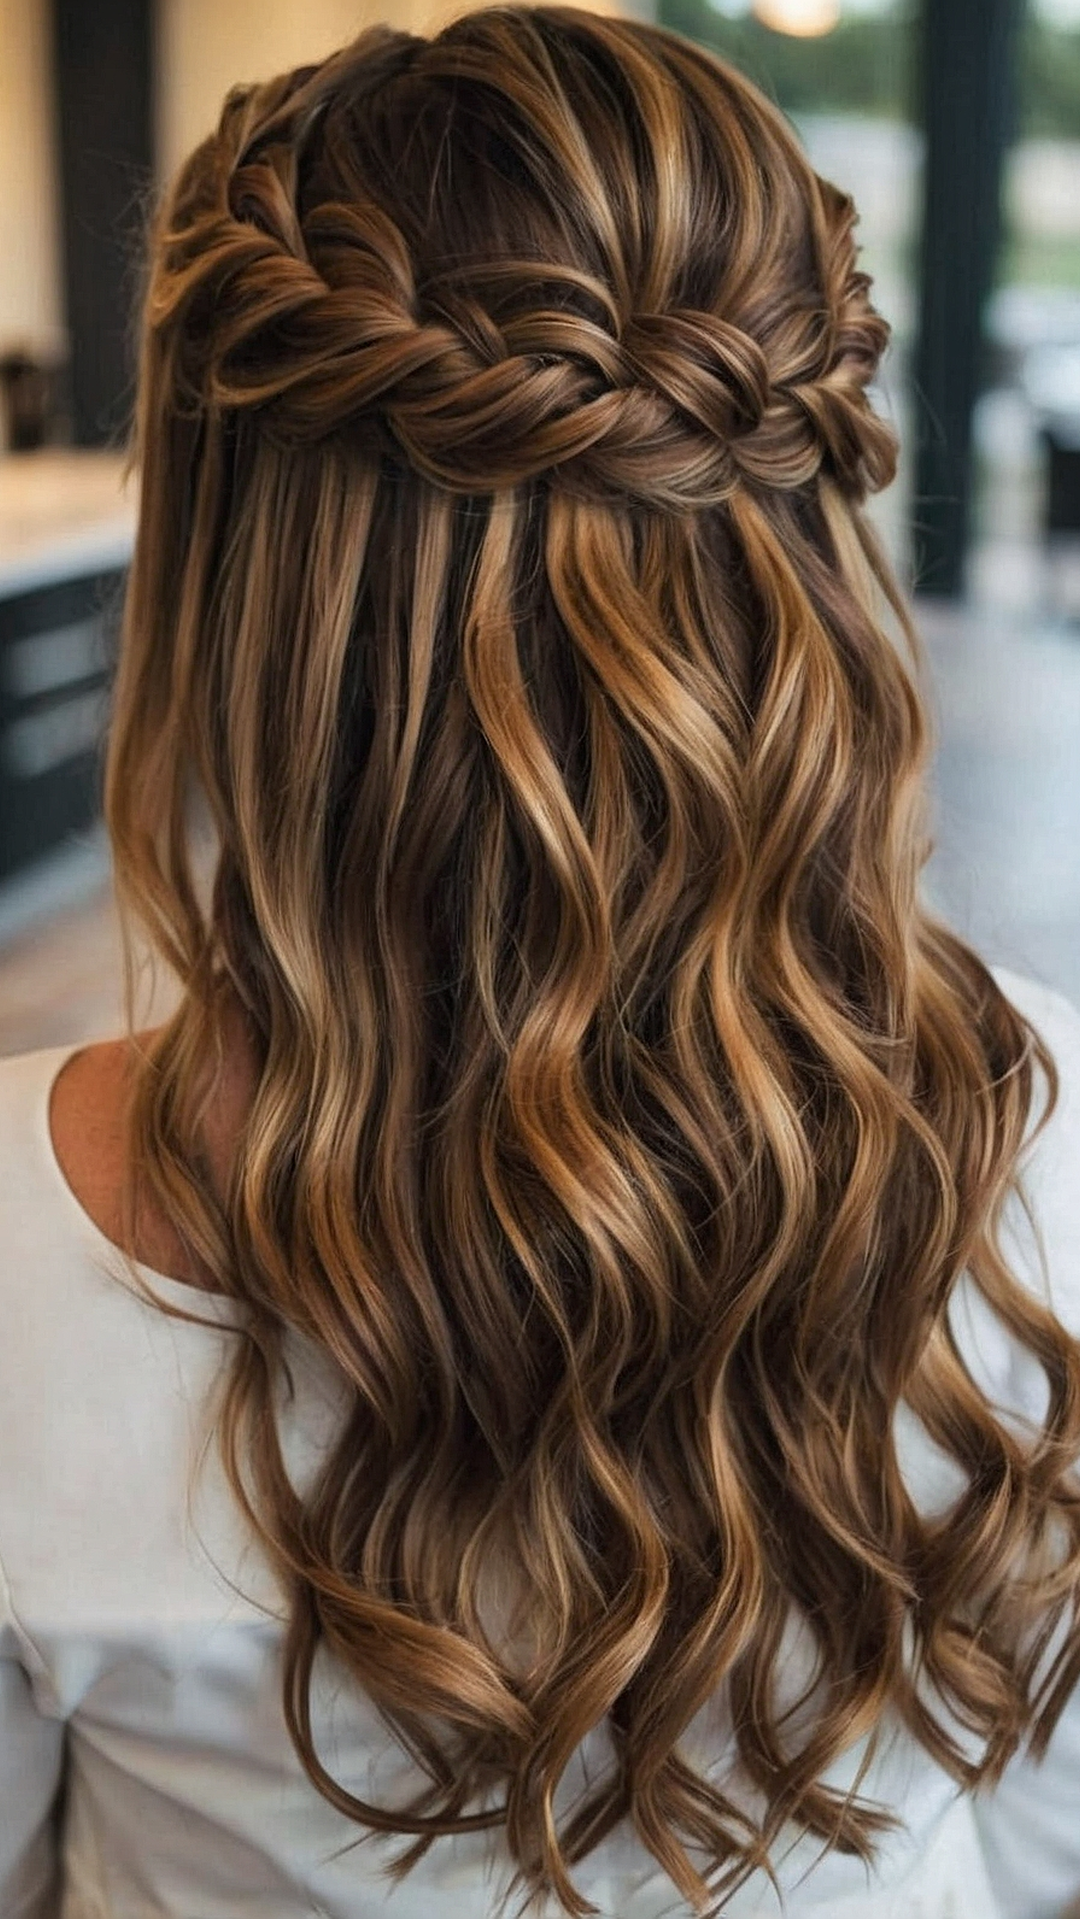 Sleek and Stylish: Chic Prom Hairstyles for Medium Length Hair